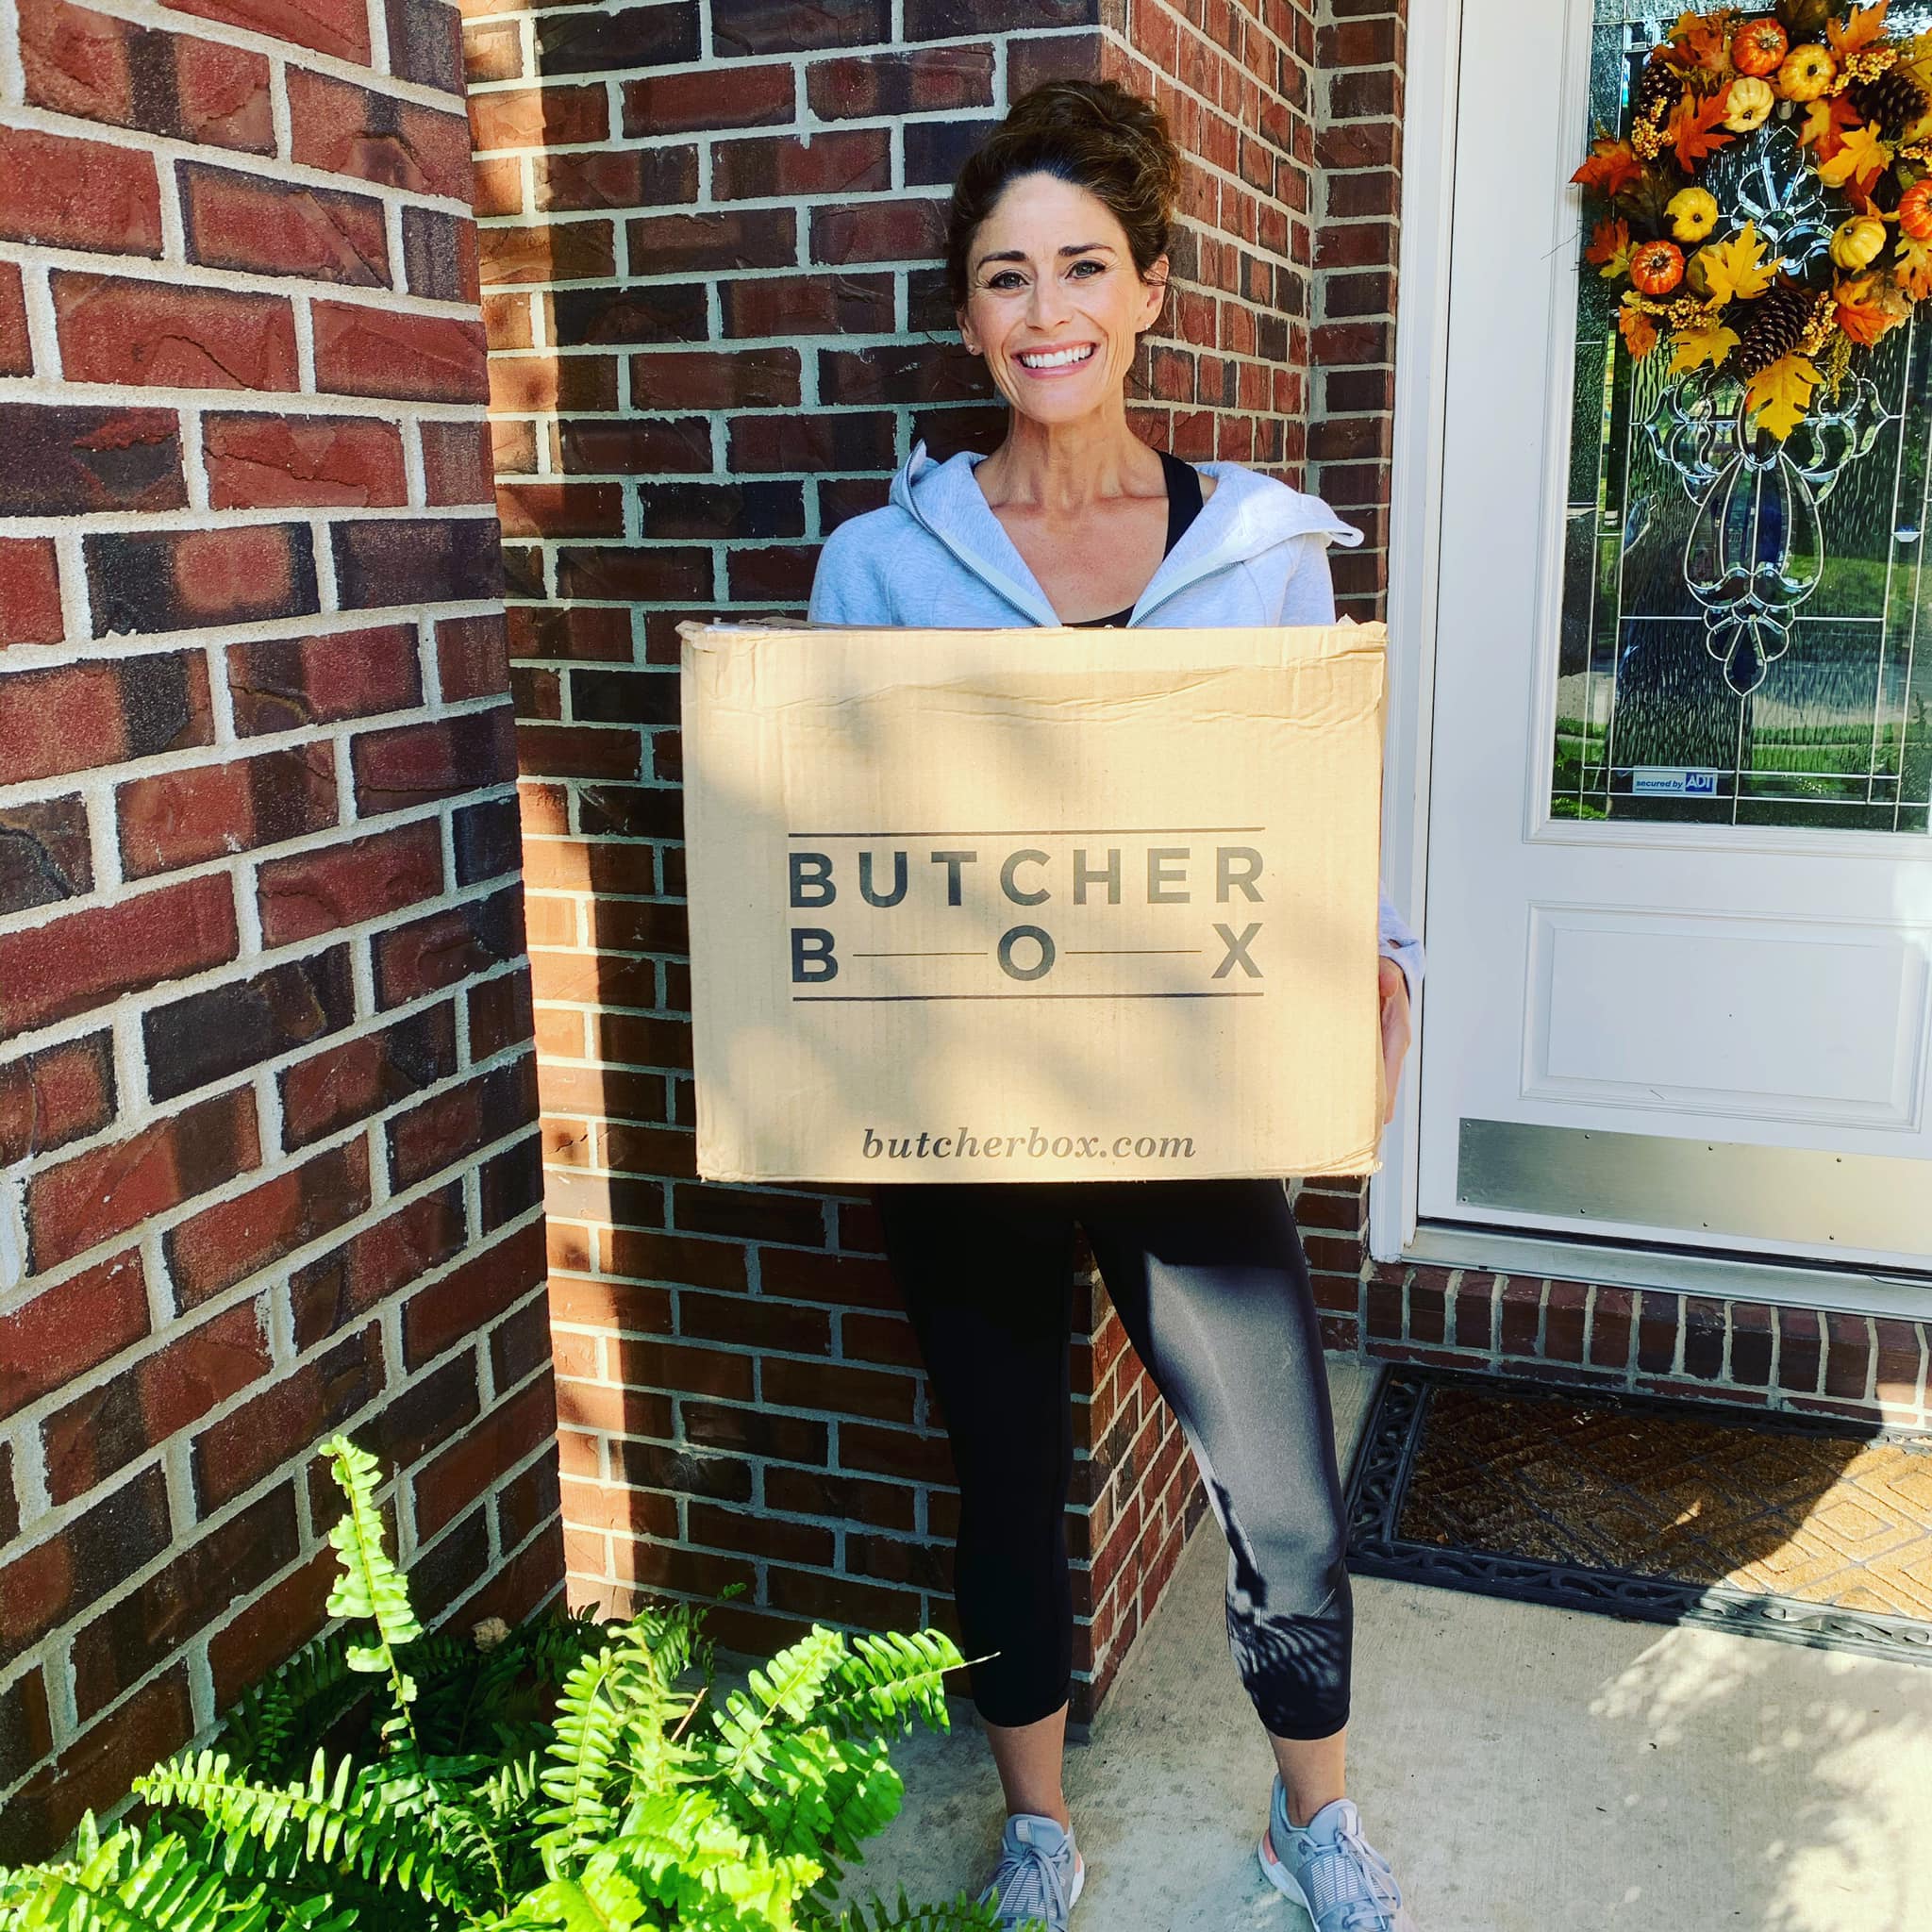 Butcher Box Review - From a family of 4 on a budget!